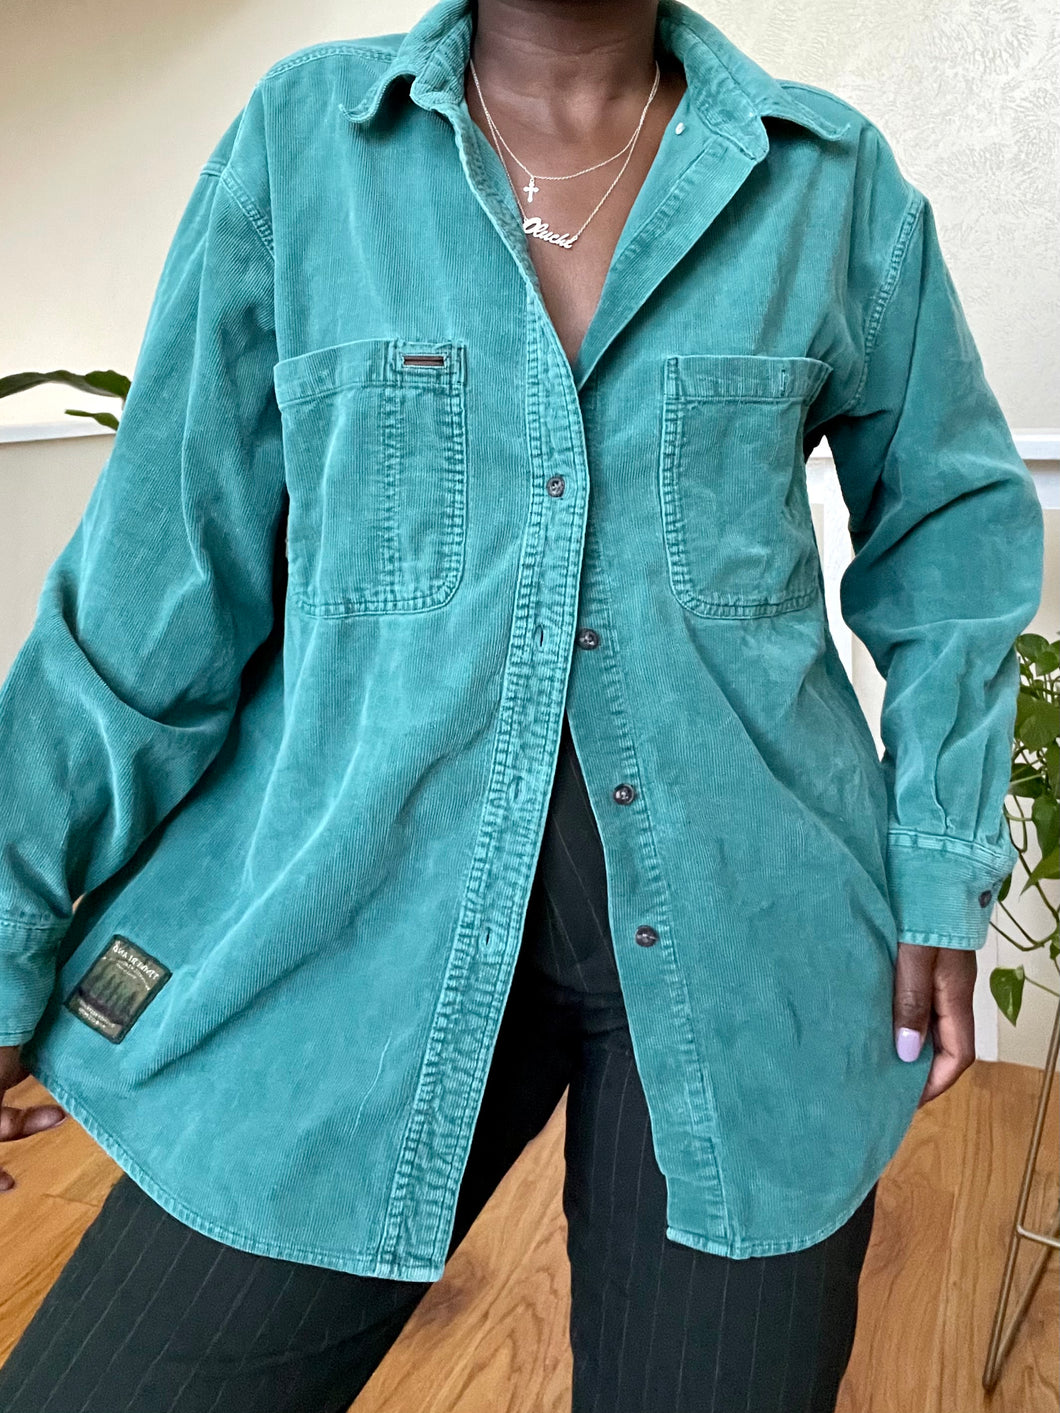 teal corduroy button up